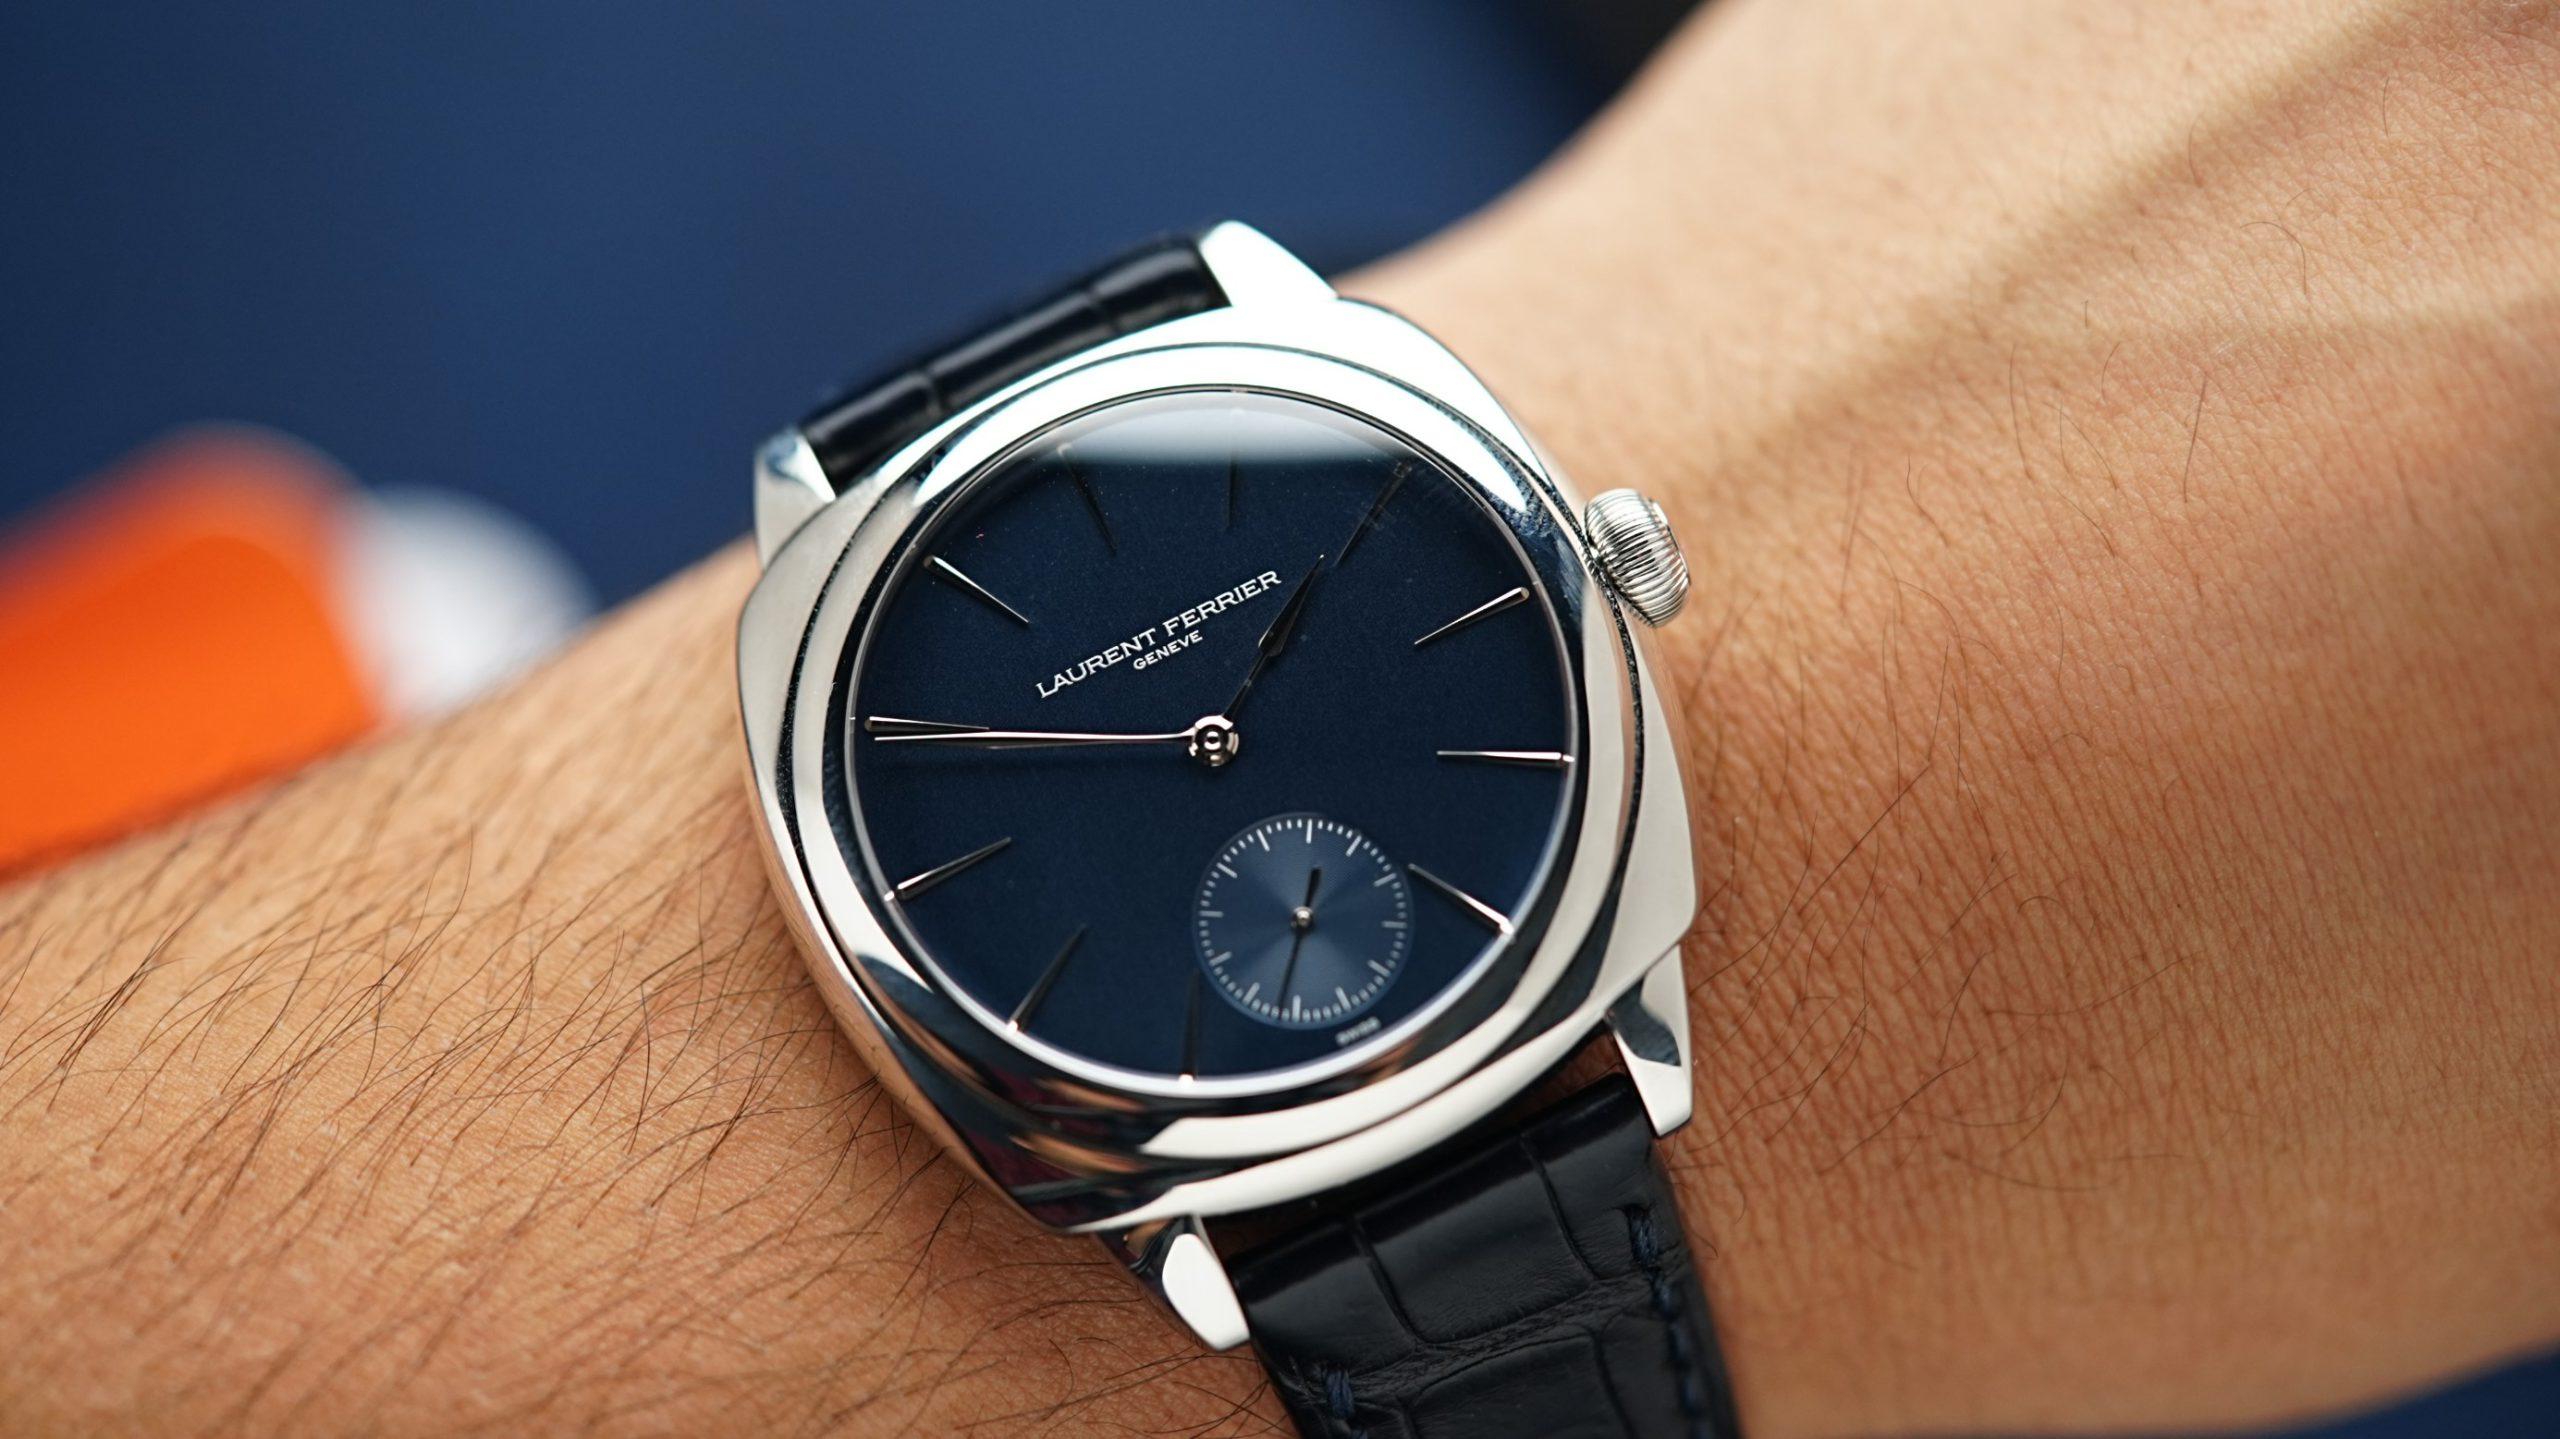 Laurent Ferrier MICRO-ROTOR GALET SQUARE displayed on wrist.